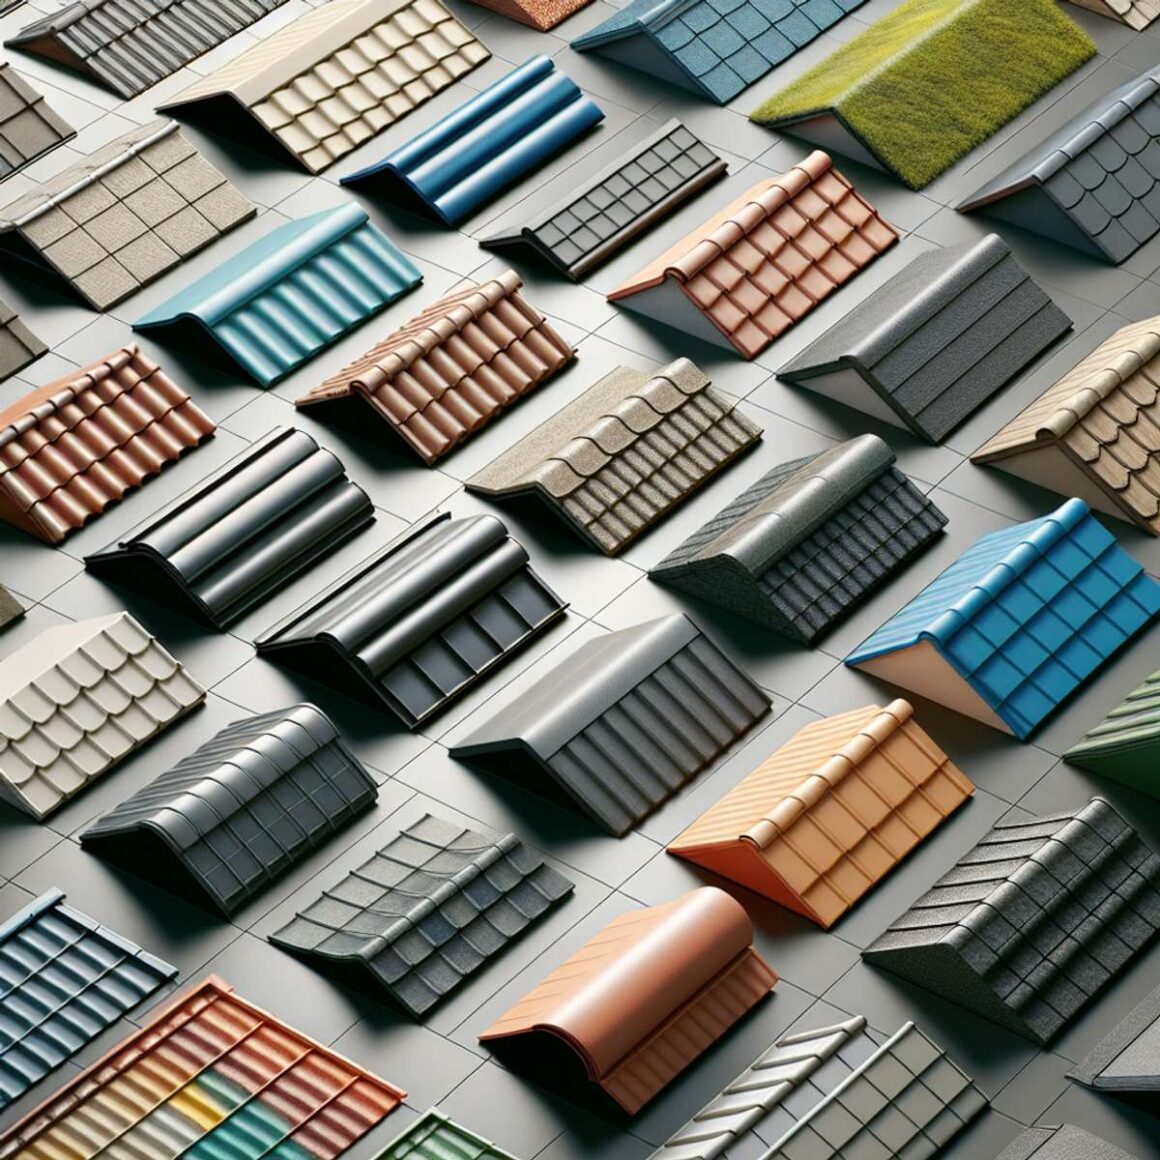 Close-up image of various commercial roofing materials including tiled roofs, metal roofs, green roofs, rolled roofing, and thermoplastic roofs, each distinct in color, texture, and style.